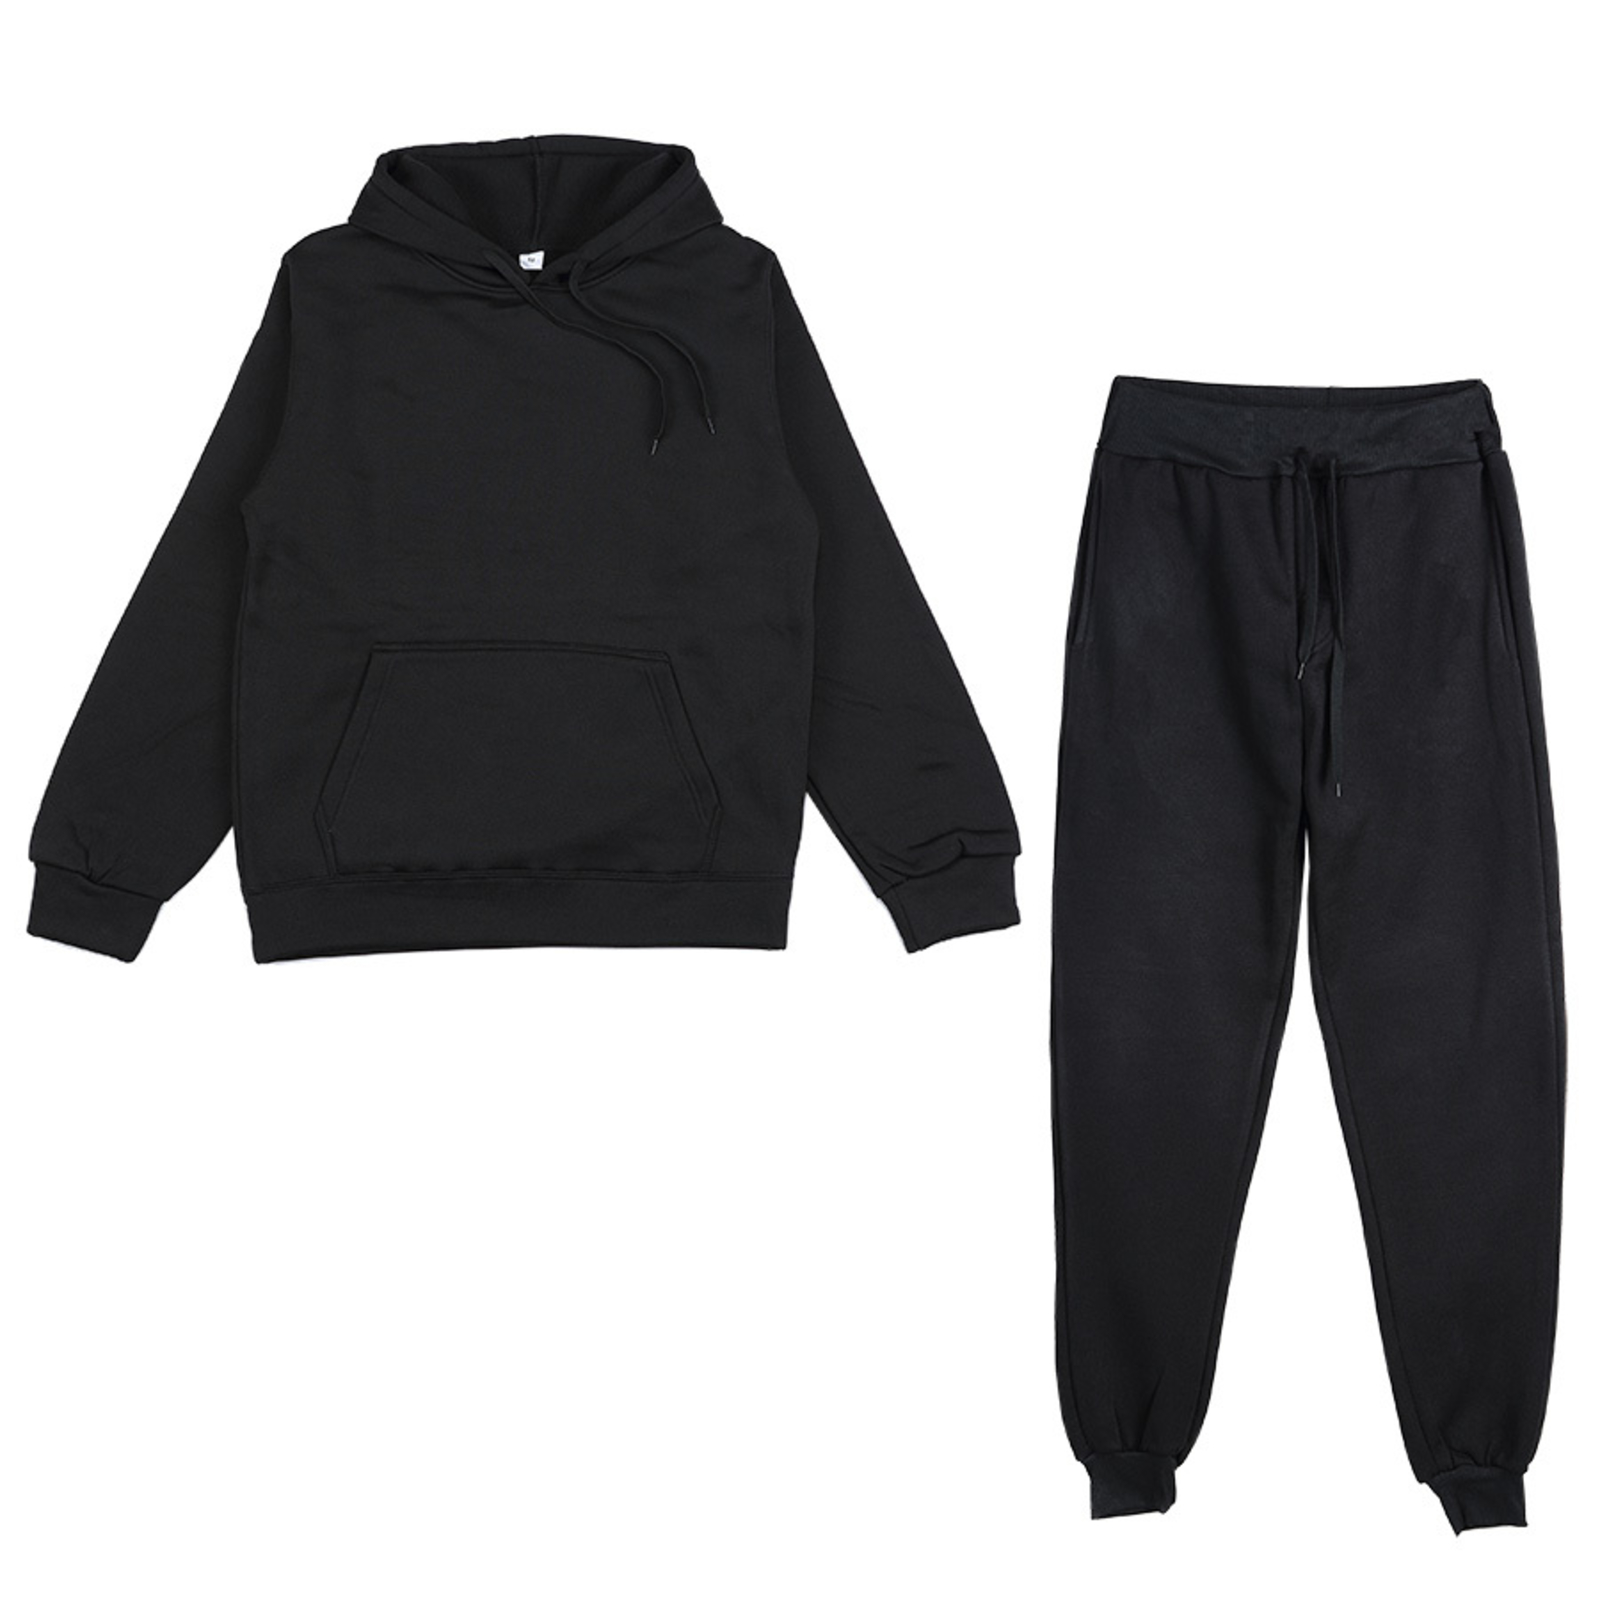 Mens Spring Fleece Sportswear Mens and Womens Casual Hoodies Couple Suit Jogging Fashion Pullover Black S3XL 220811